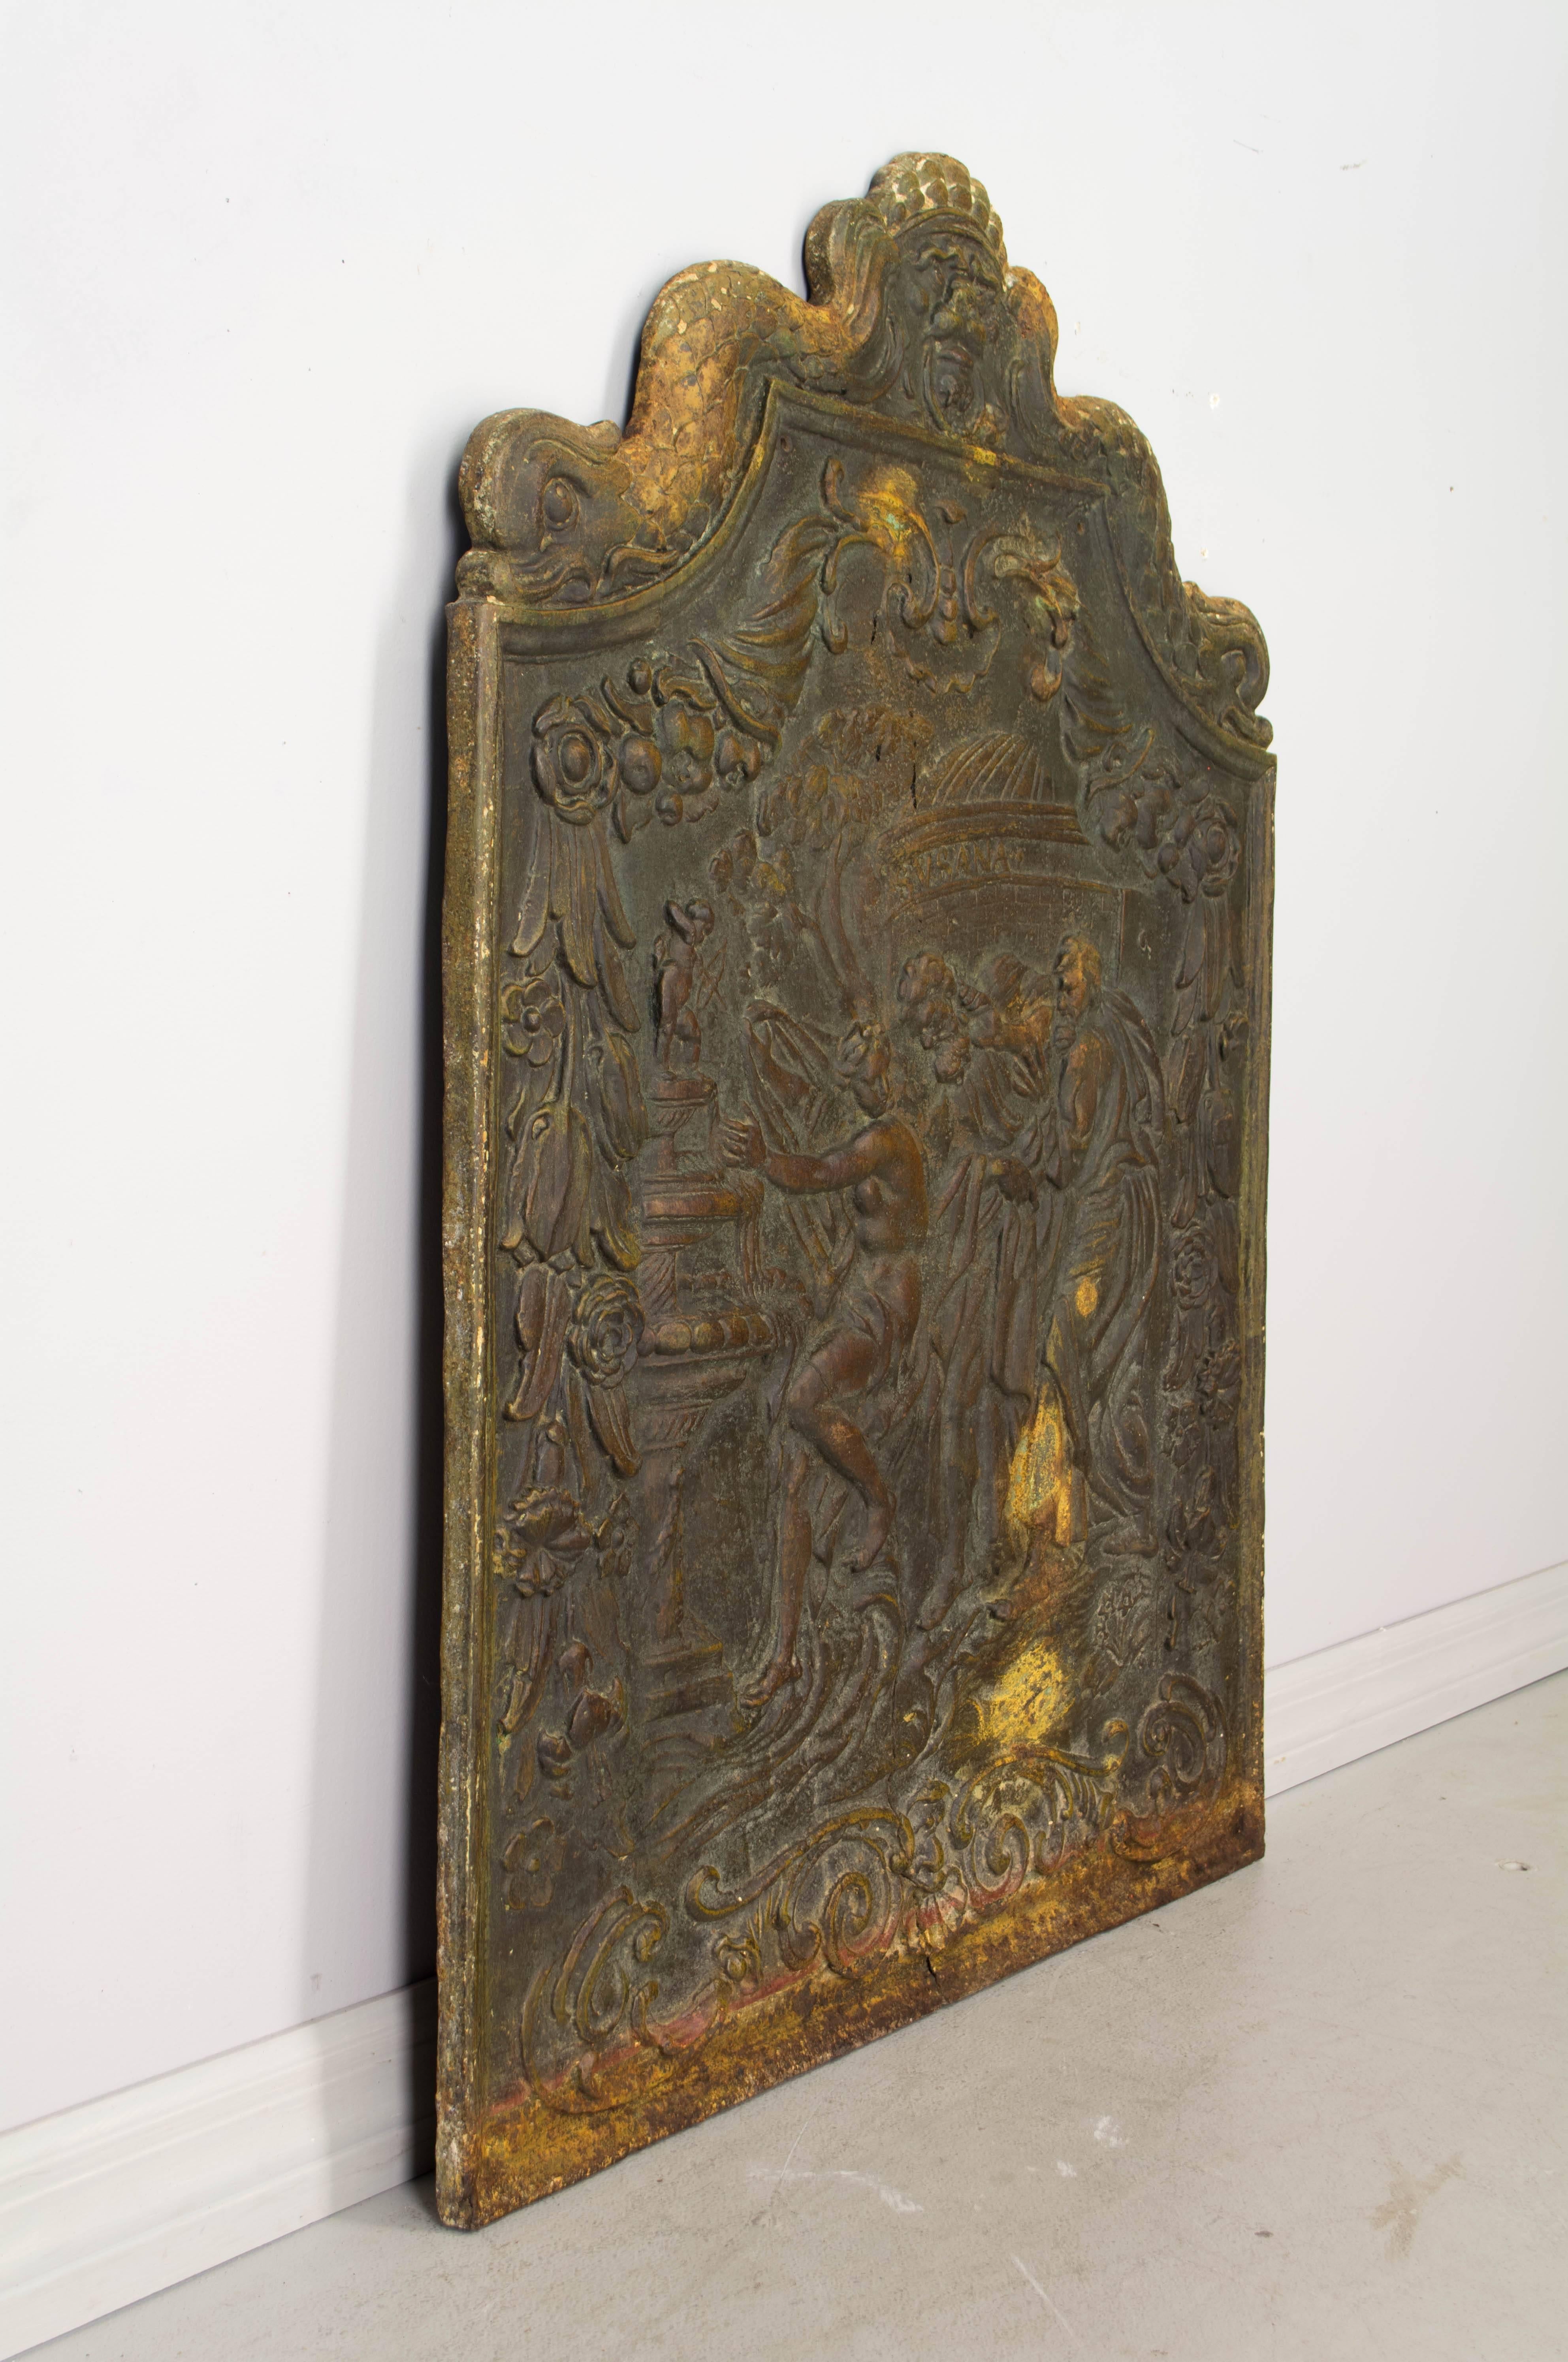 18th century French cast iron fireback depicting Susanna and the Elders. Expert casting with detailed relief and shaped crest. Notice the crack from the bottom left of center.
Contact us for a competitive shipping quotation. Please refer to photos